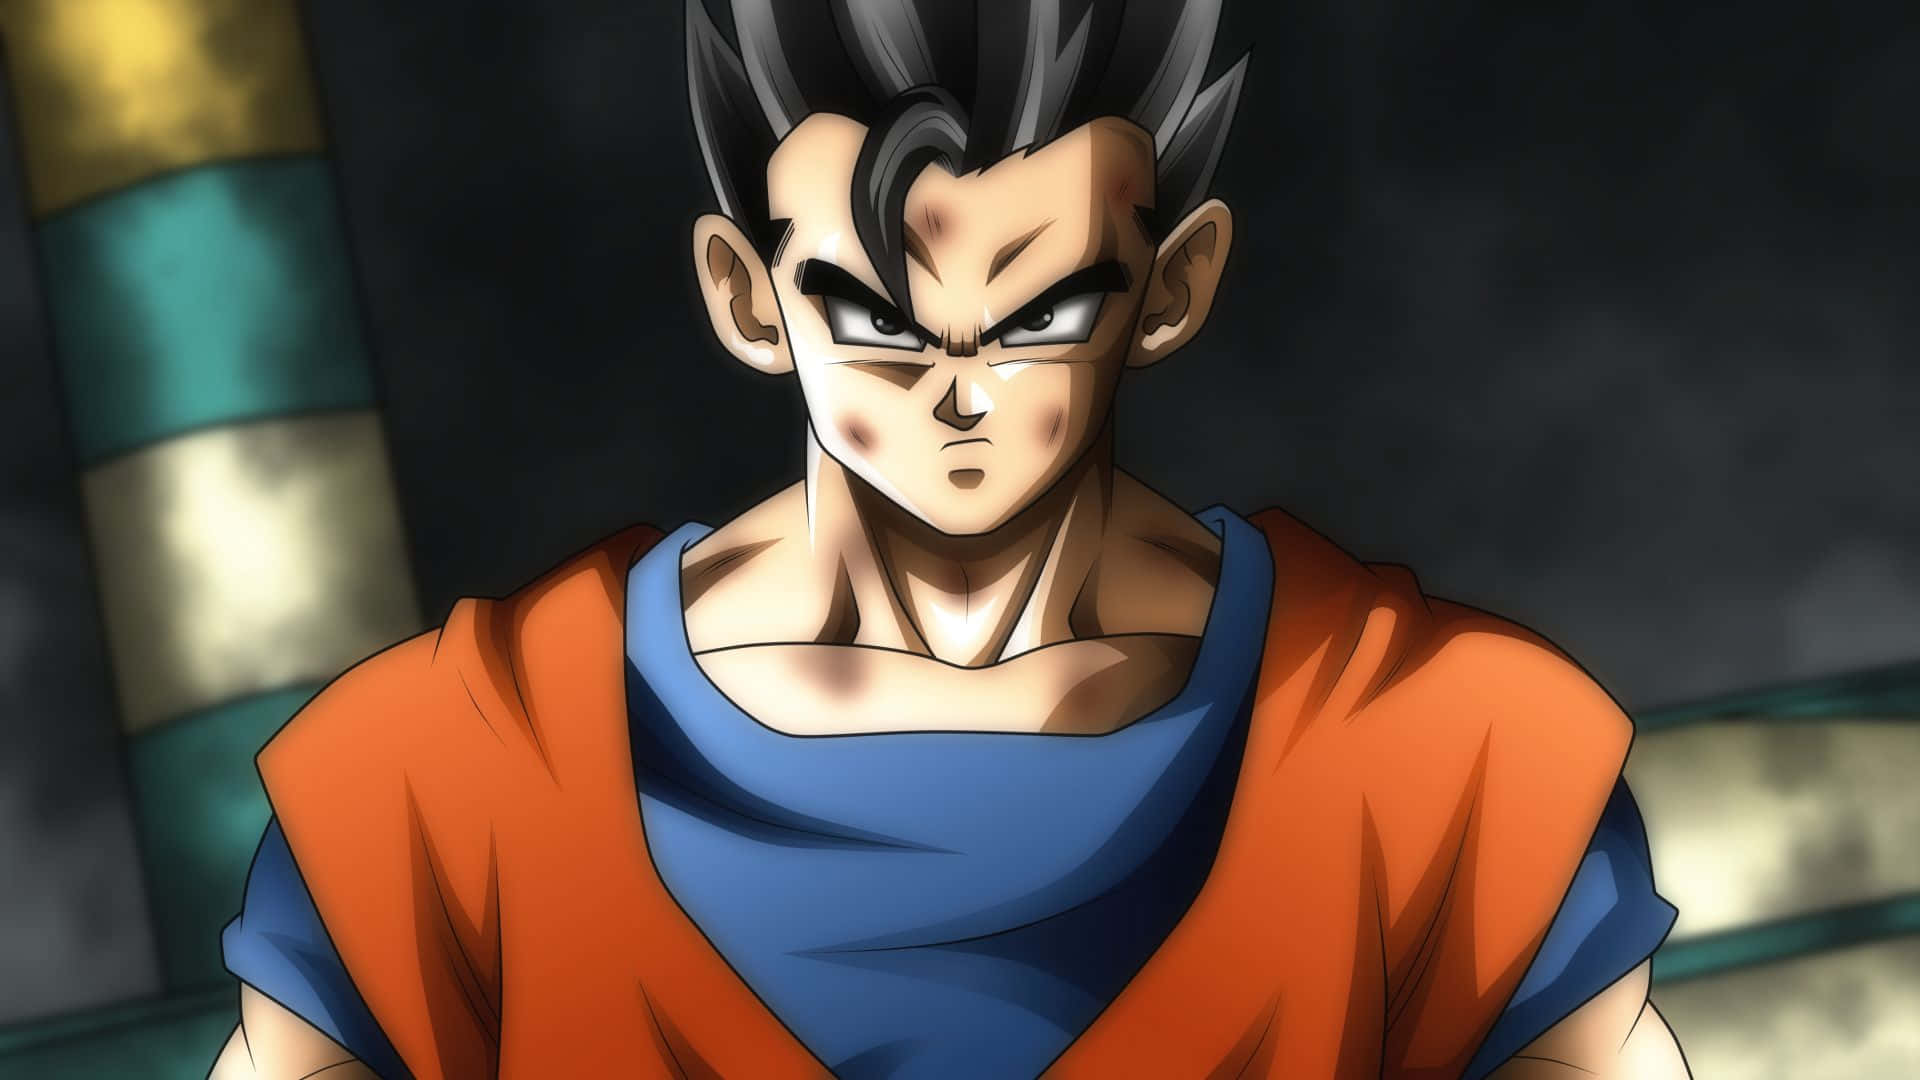 Angry Goku Faces Off In Epic Battle Wallpaper